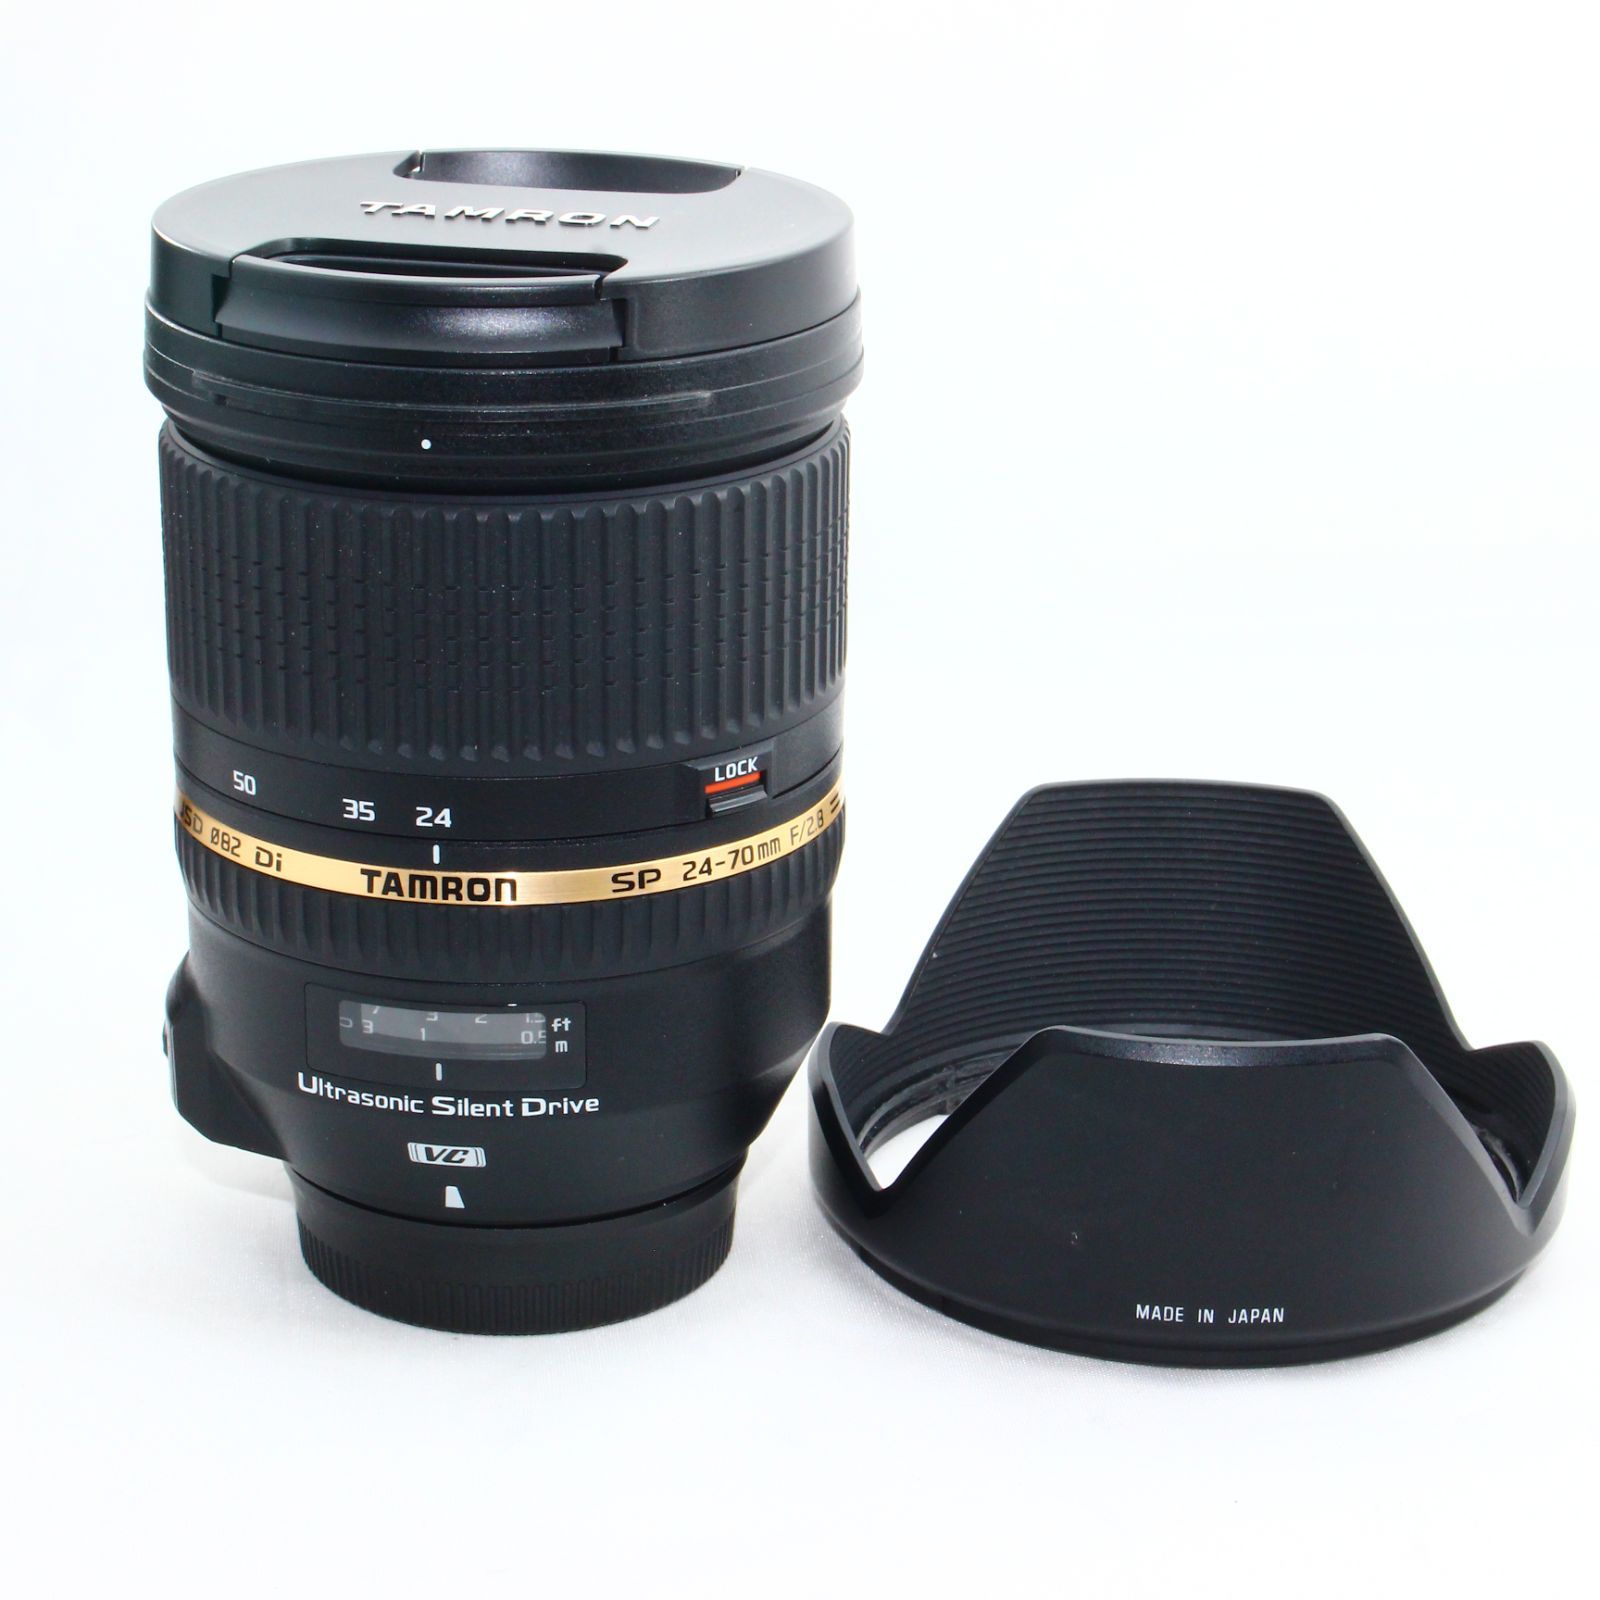 TAMRON ズームレンズ SP 24-70mm F2.8 ニコン用 A007N-